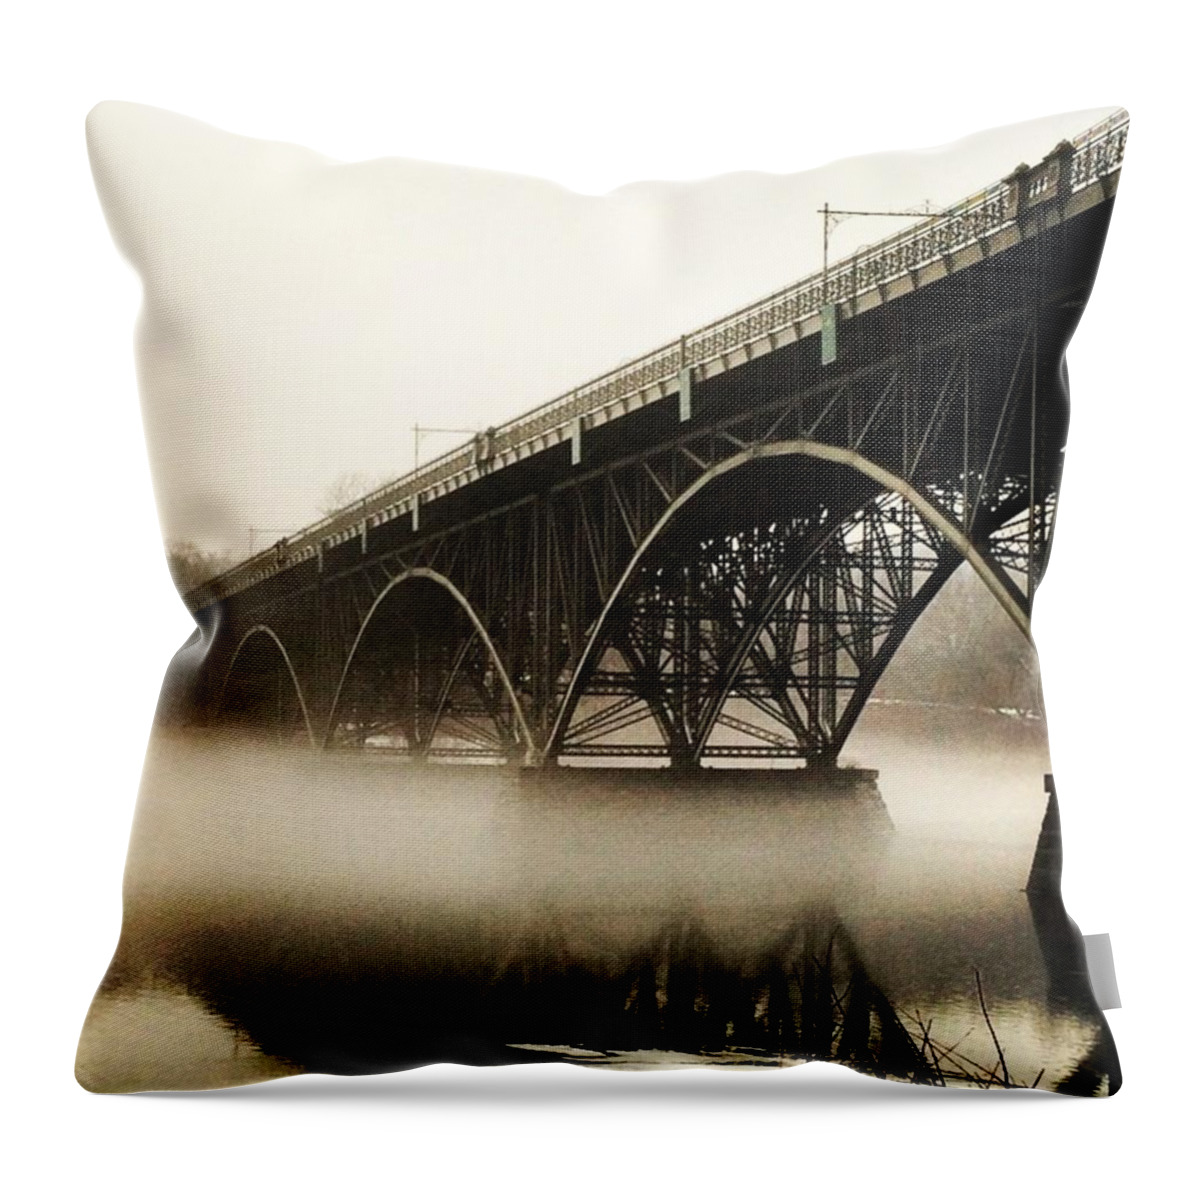 Pmmag Throw Pillow featuring the photograph Dream Sequence by Katie Cupcakes